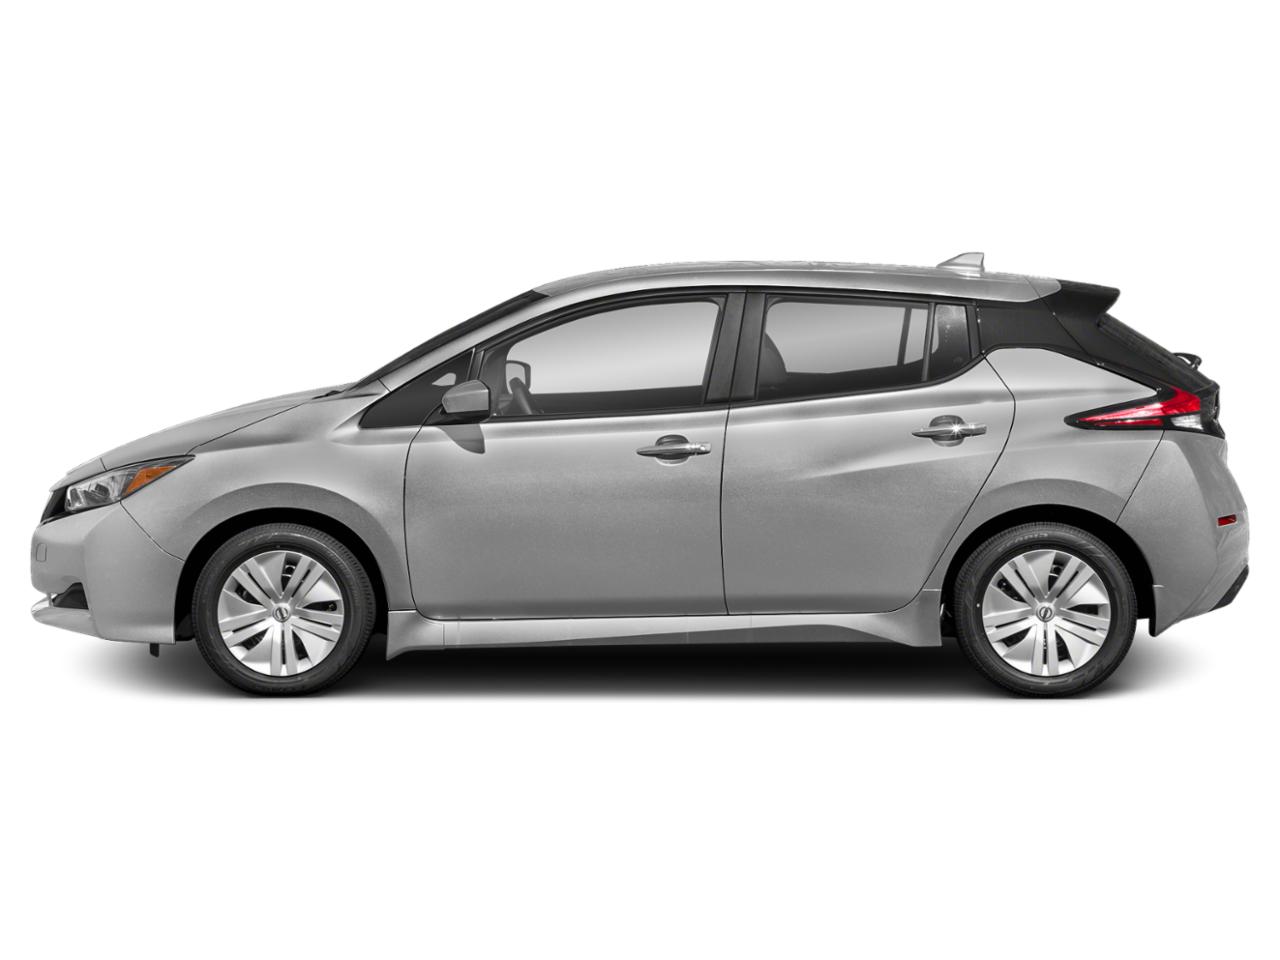 Used 2022 Nissan LEAF S Plus with VIN 1N4BZ1BV2NC556111 for sale in Aransas Pass, TX